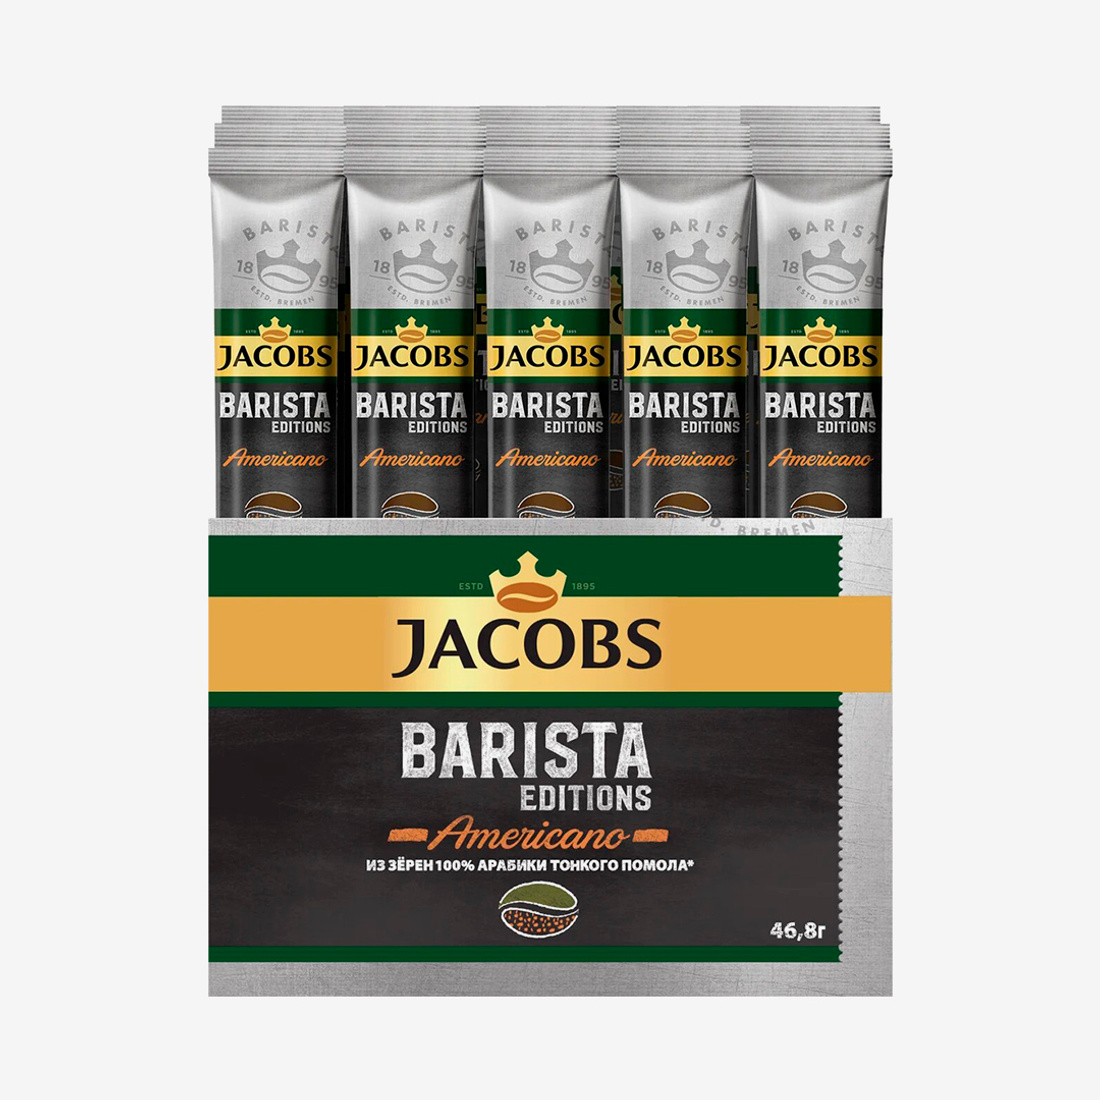 30 1 g | pcs Americano Barista Coffee instant Jacobs coffee in 46.8 3